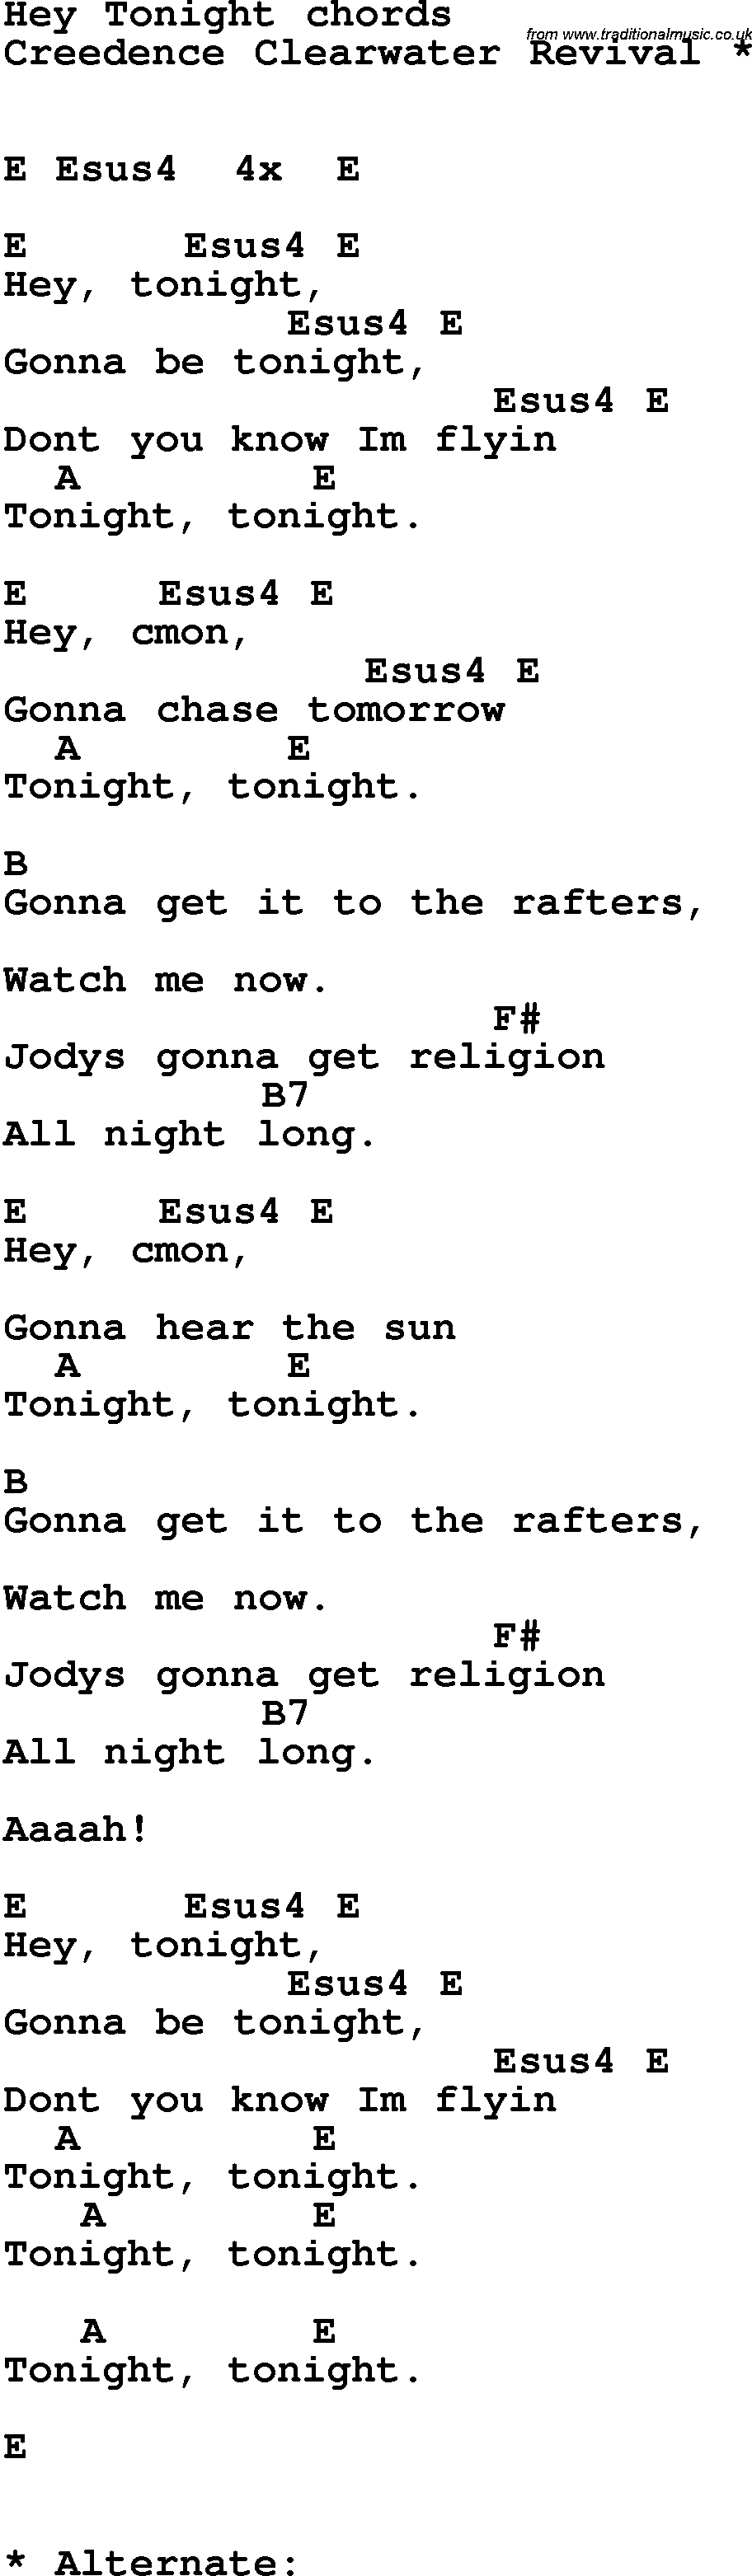 Song Lyrics with guitar chords for Hey Tonight